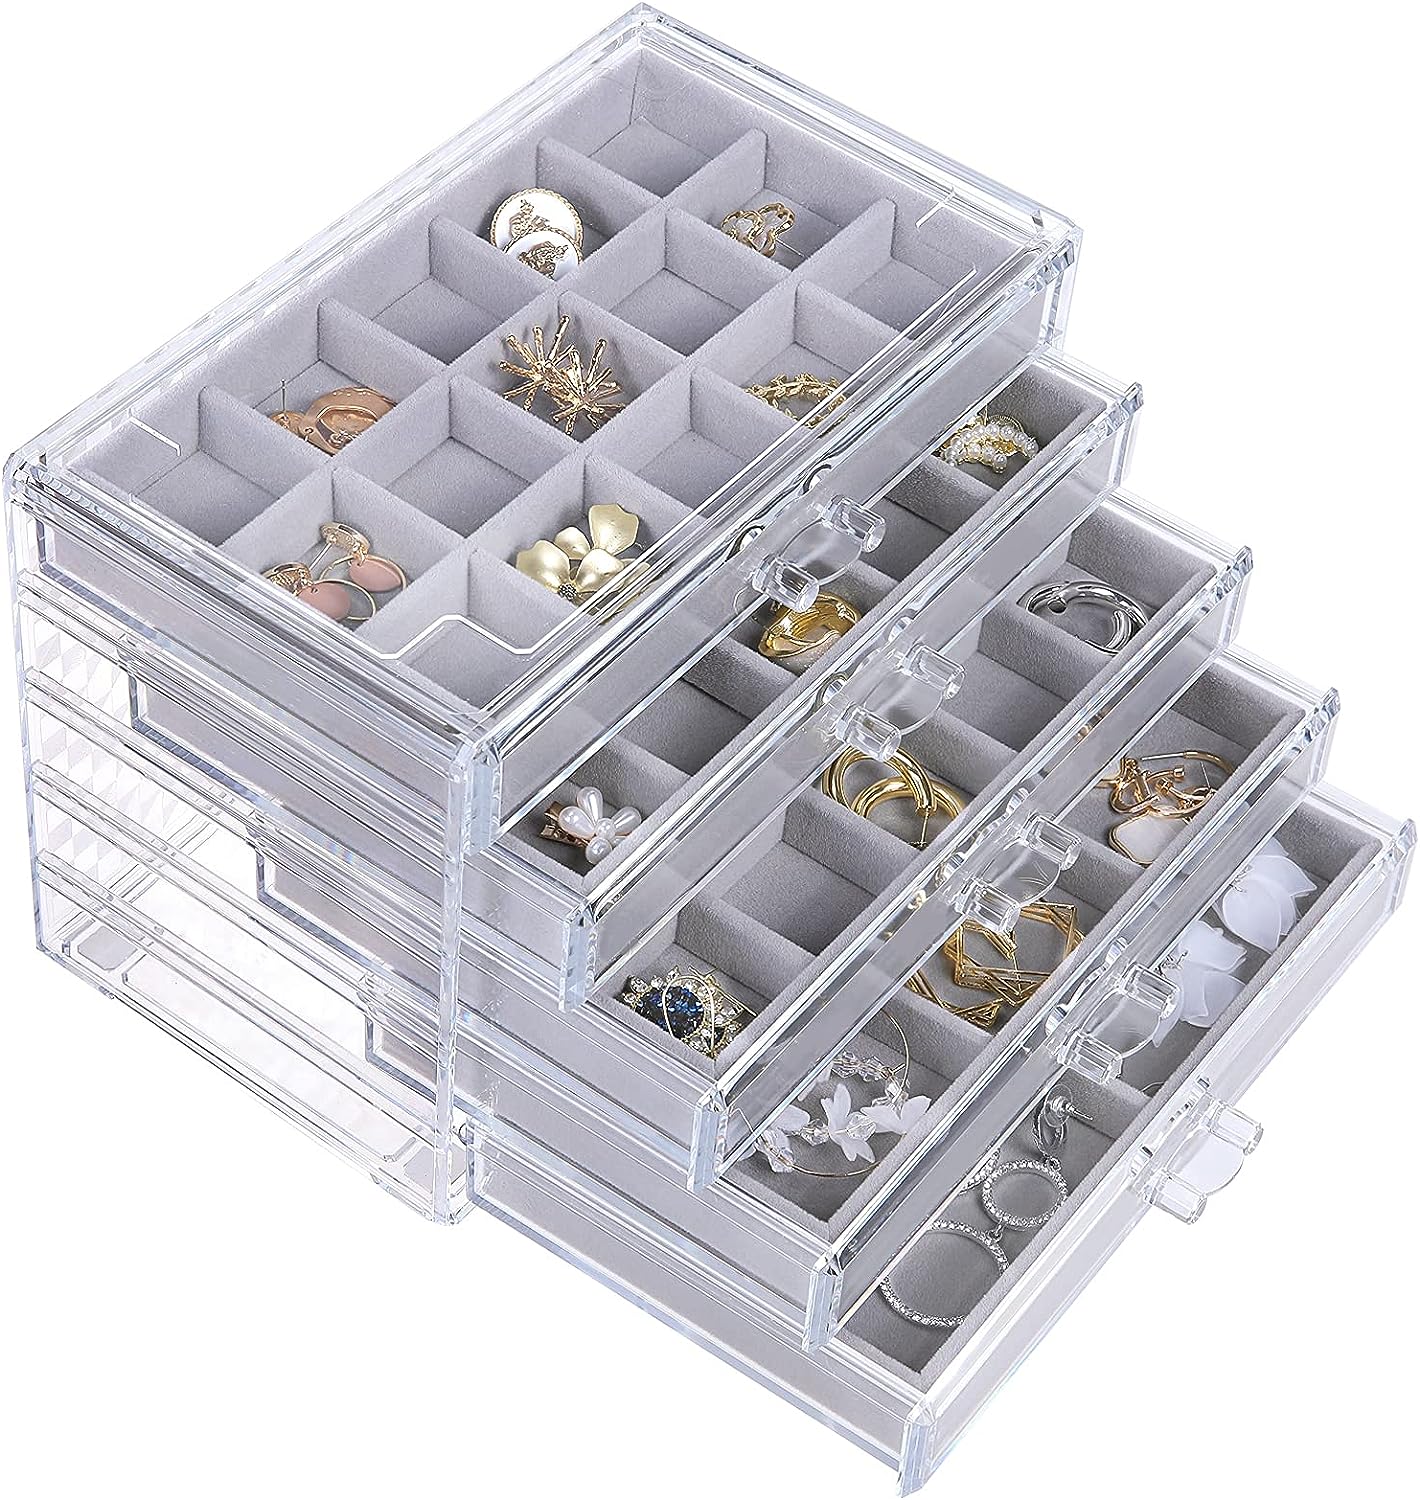 misaya Earring Jewelry Organizer with 5 Drawers, Gift for Women, Girls, Clear Acrylic Jewelry Box for Women, Velvet Earring Display Holder for Earrings Ring Bracelet Necklace, Gray